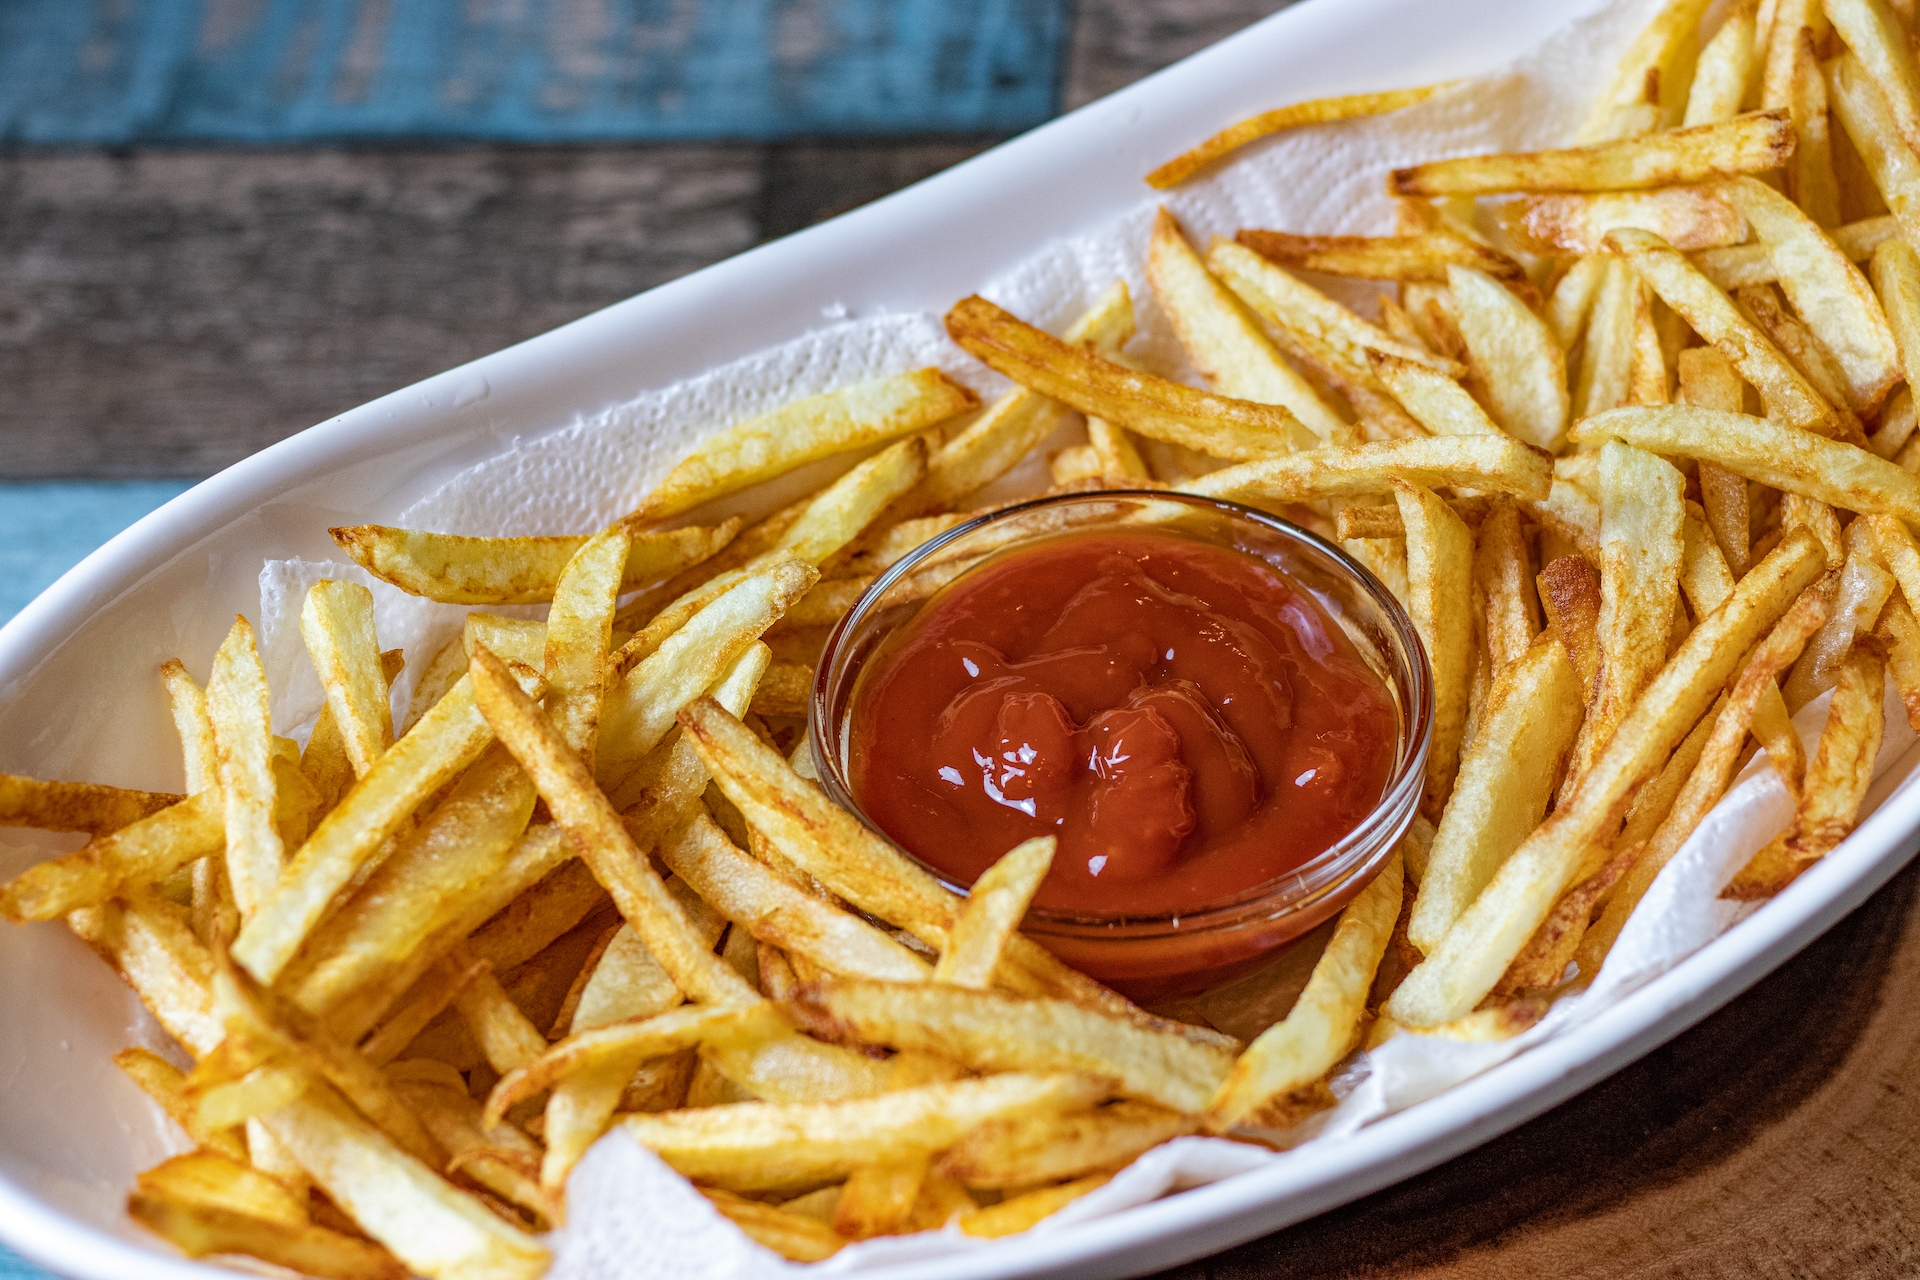 Making crispy potato fries is not difficult if you know those tips